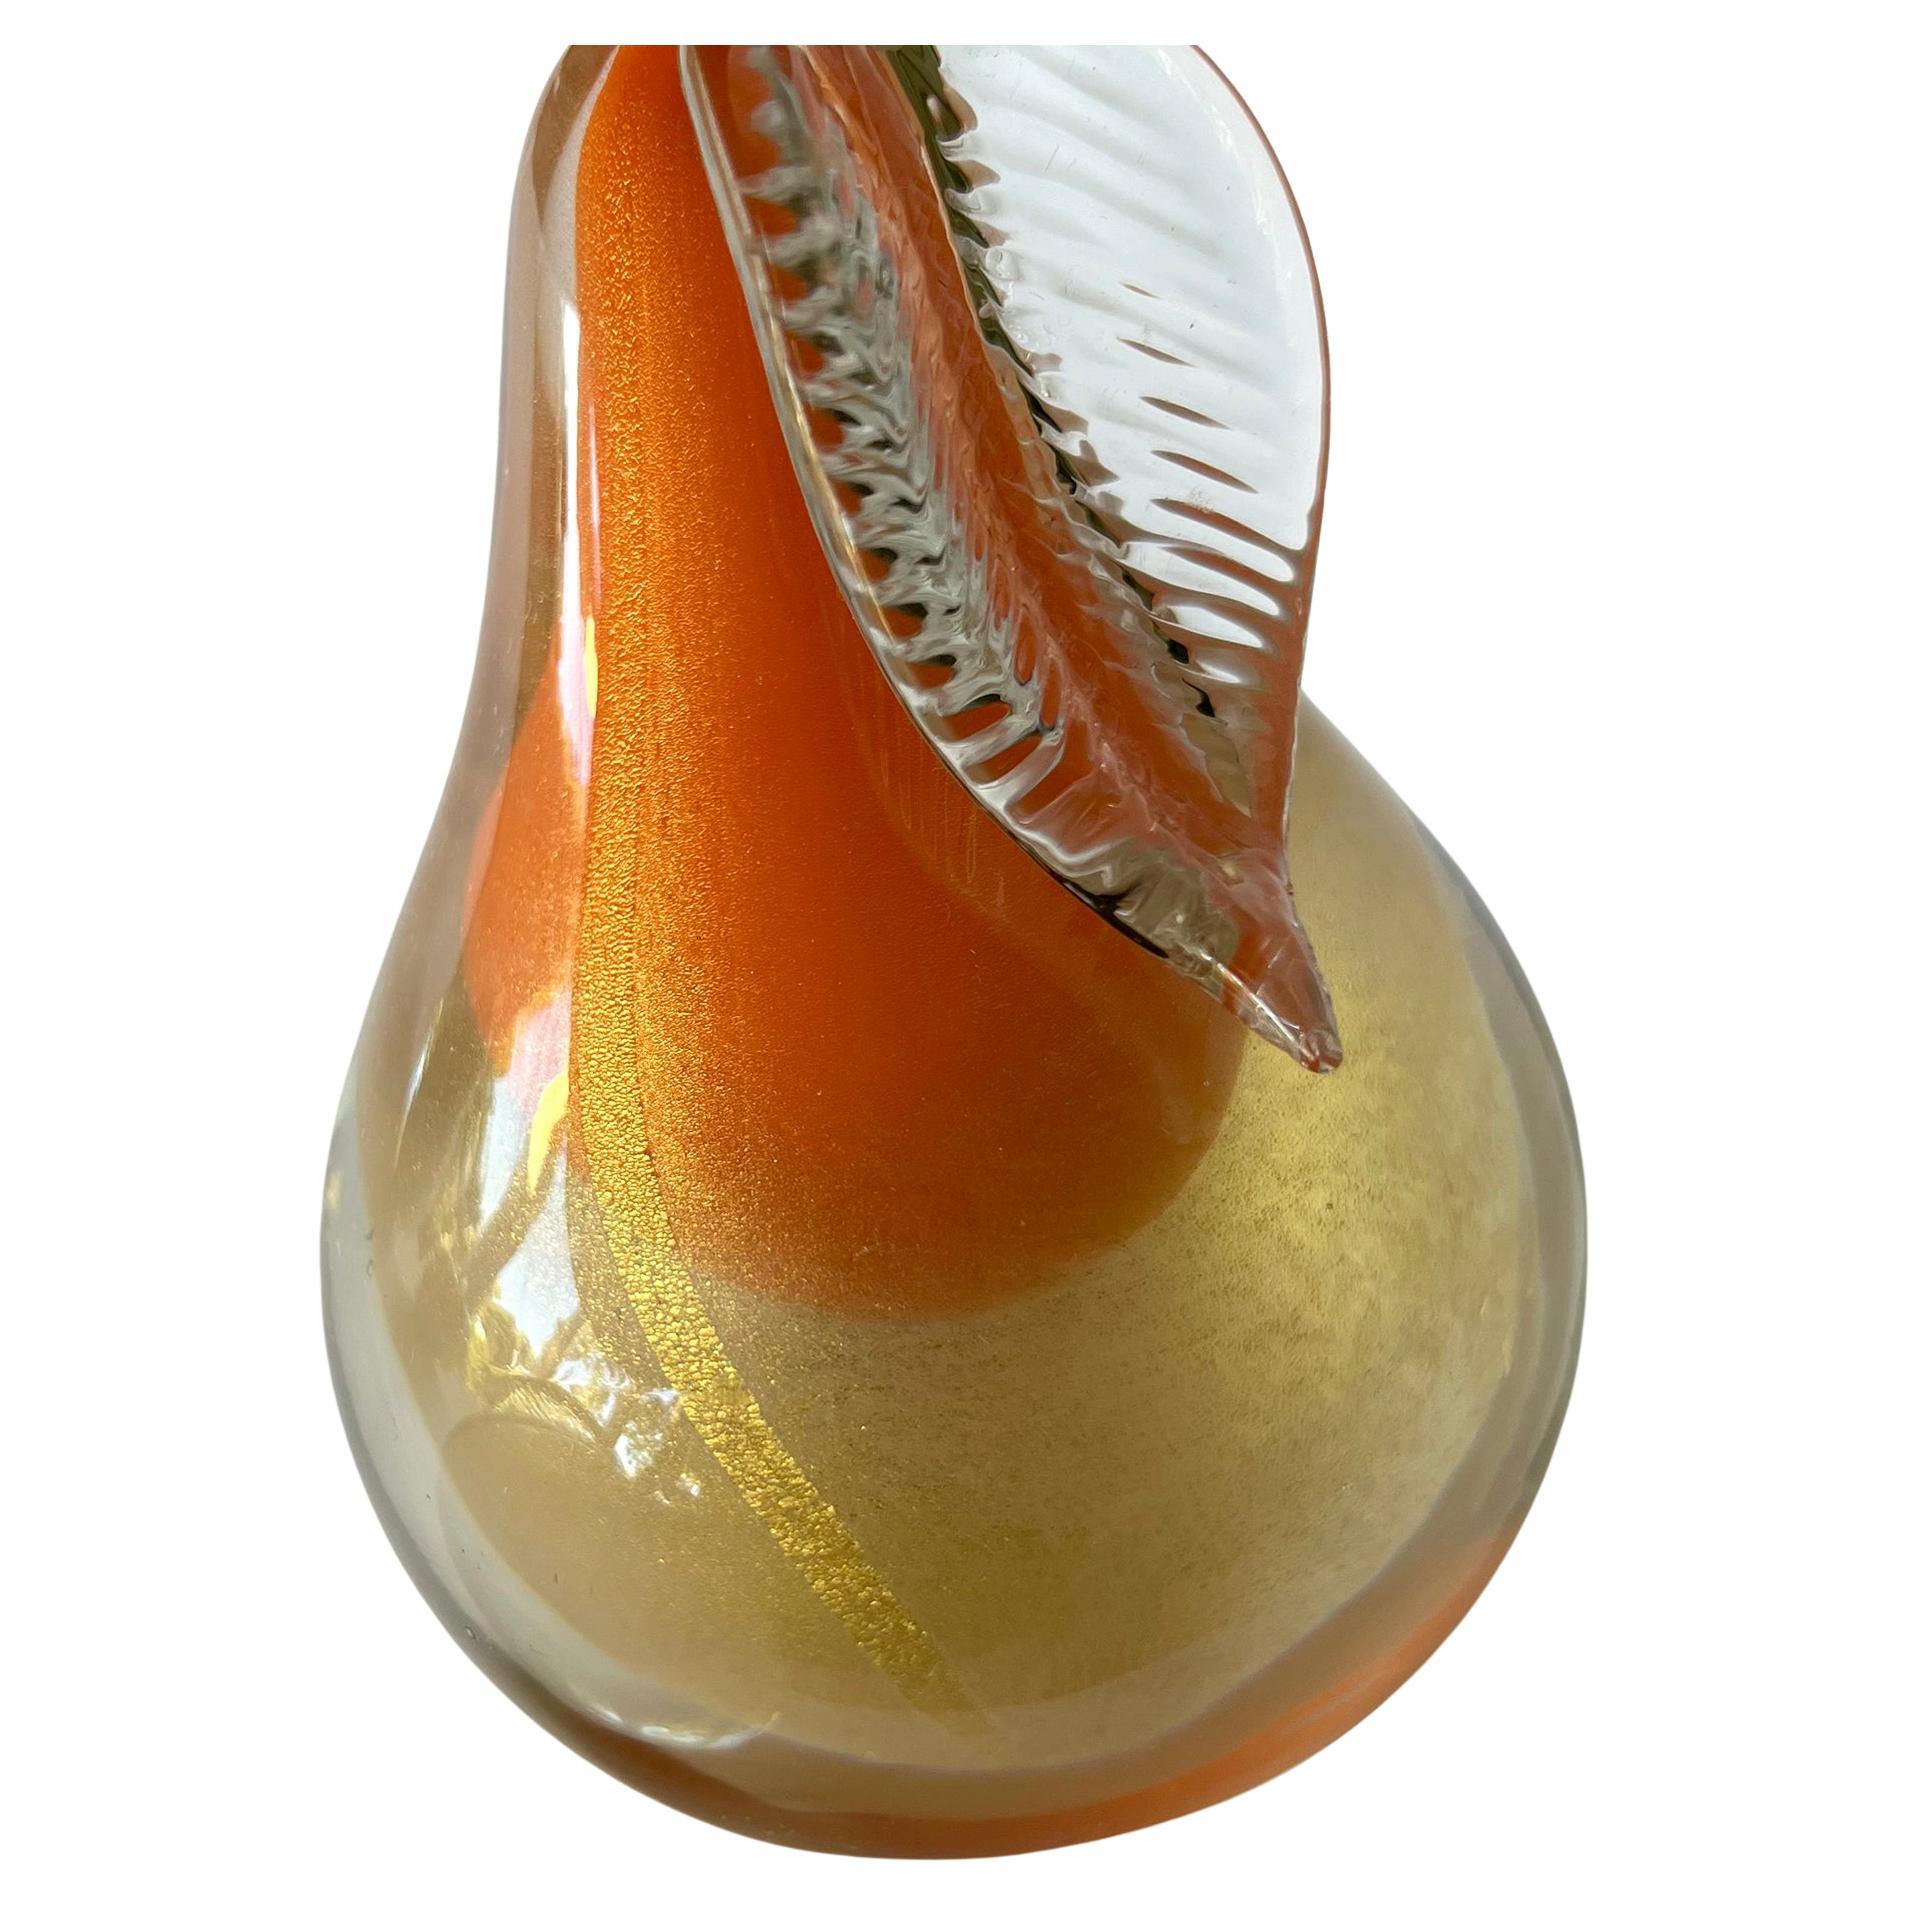 Alfredo Barbini glass fruit paperweights or bookends with layers of golden aventurine within.  Made in Murano, Italy circa 1950's.  Pear measures 6.5